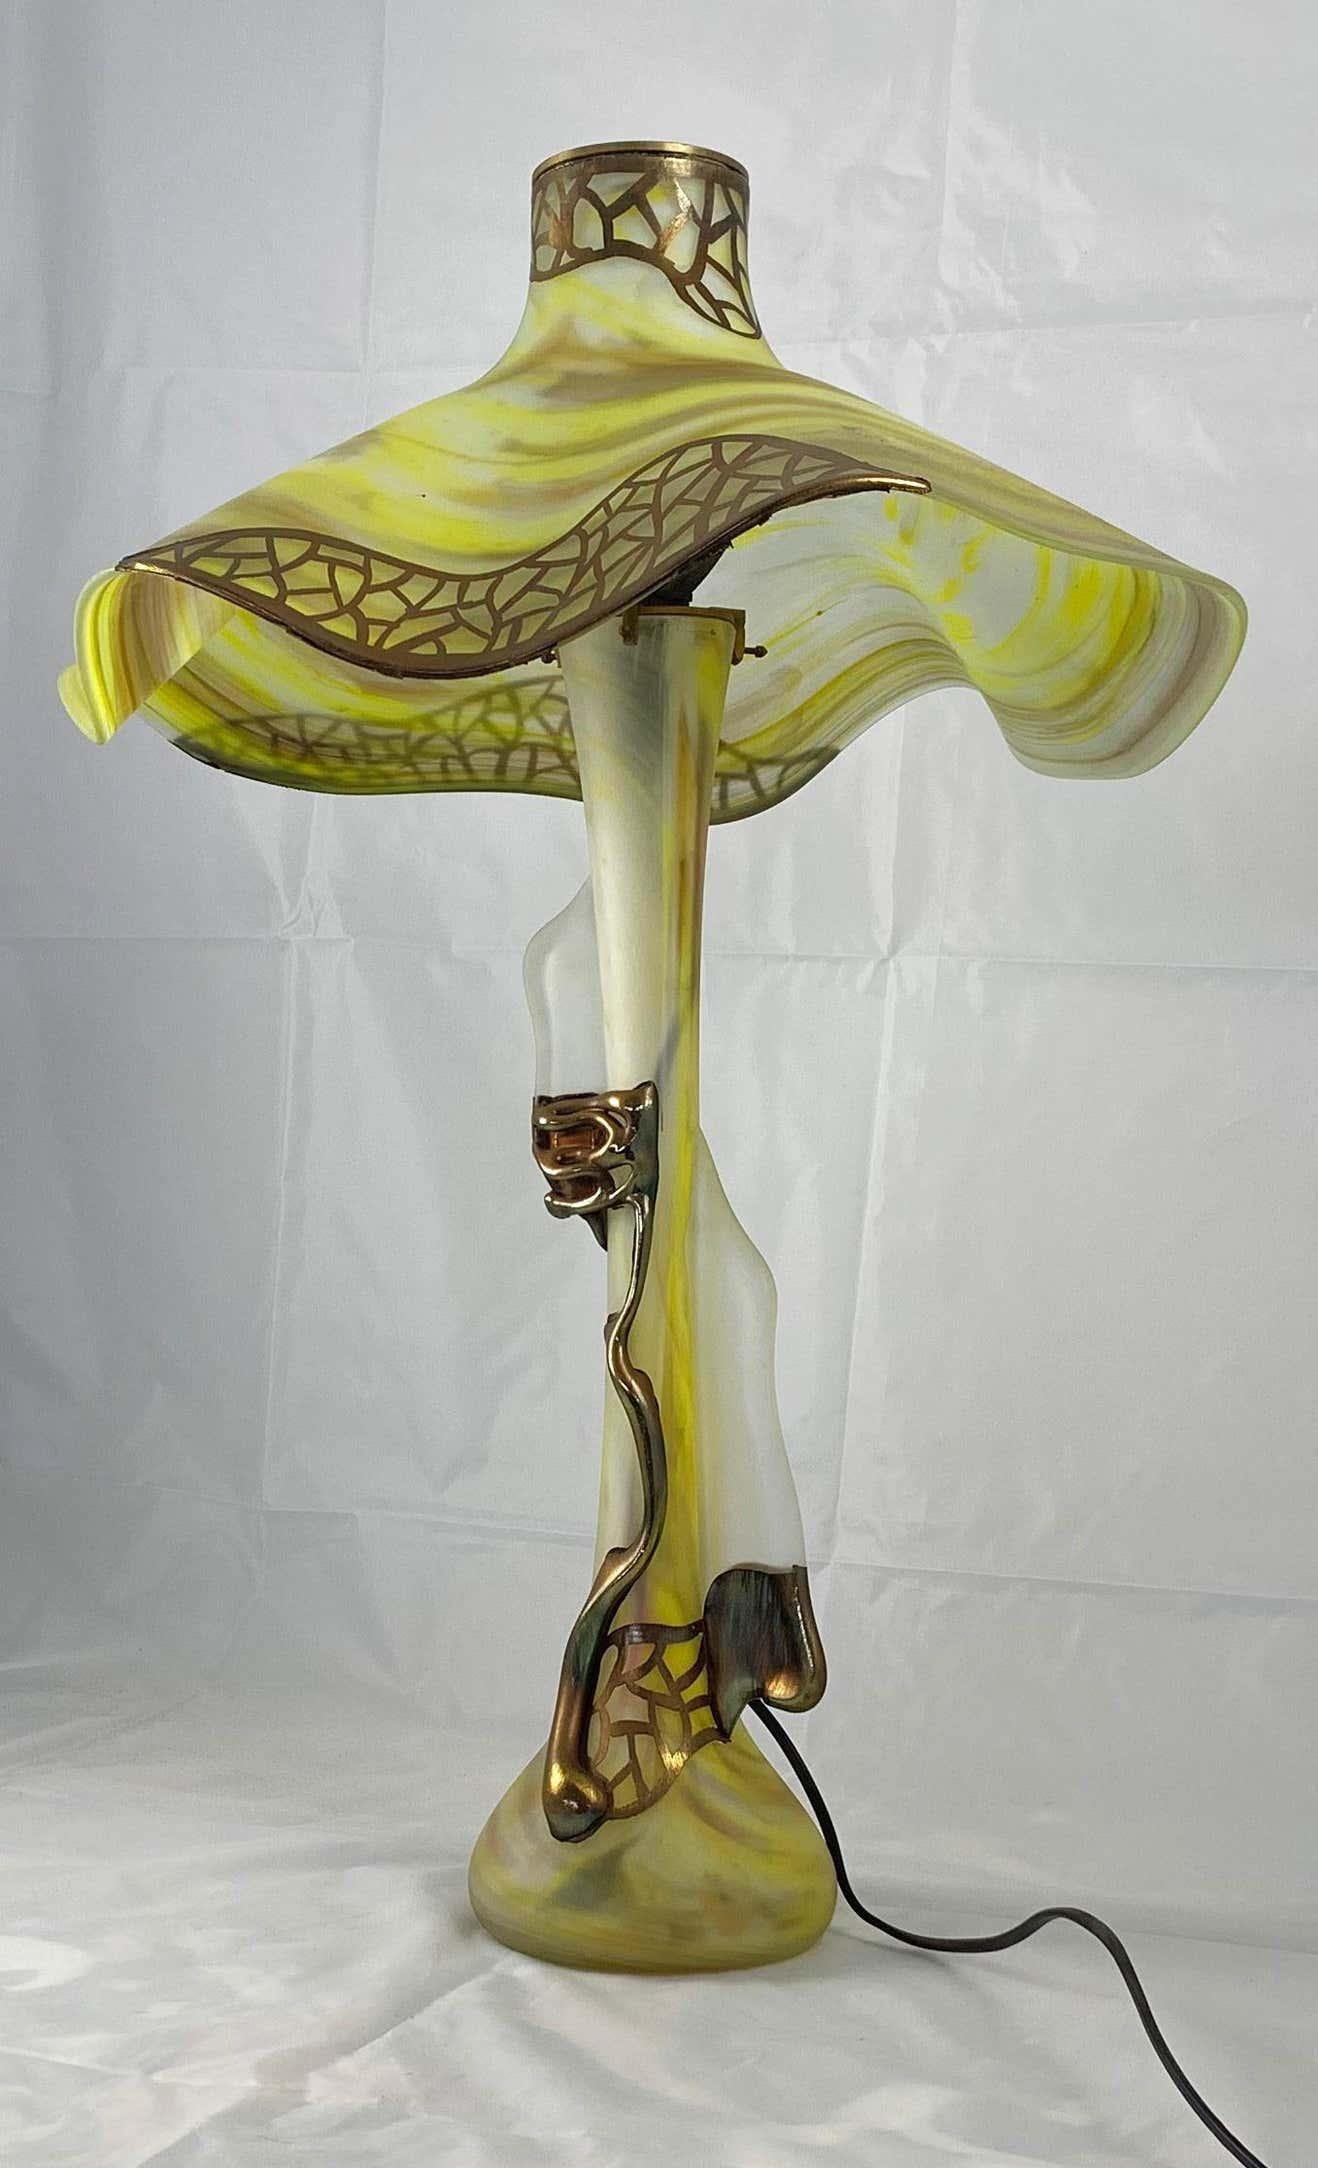 Hand-Crafted 20th Century Unusual Art Glass Table Lamp in Art Nouveau Style For Sale